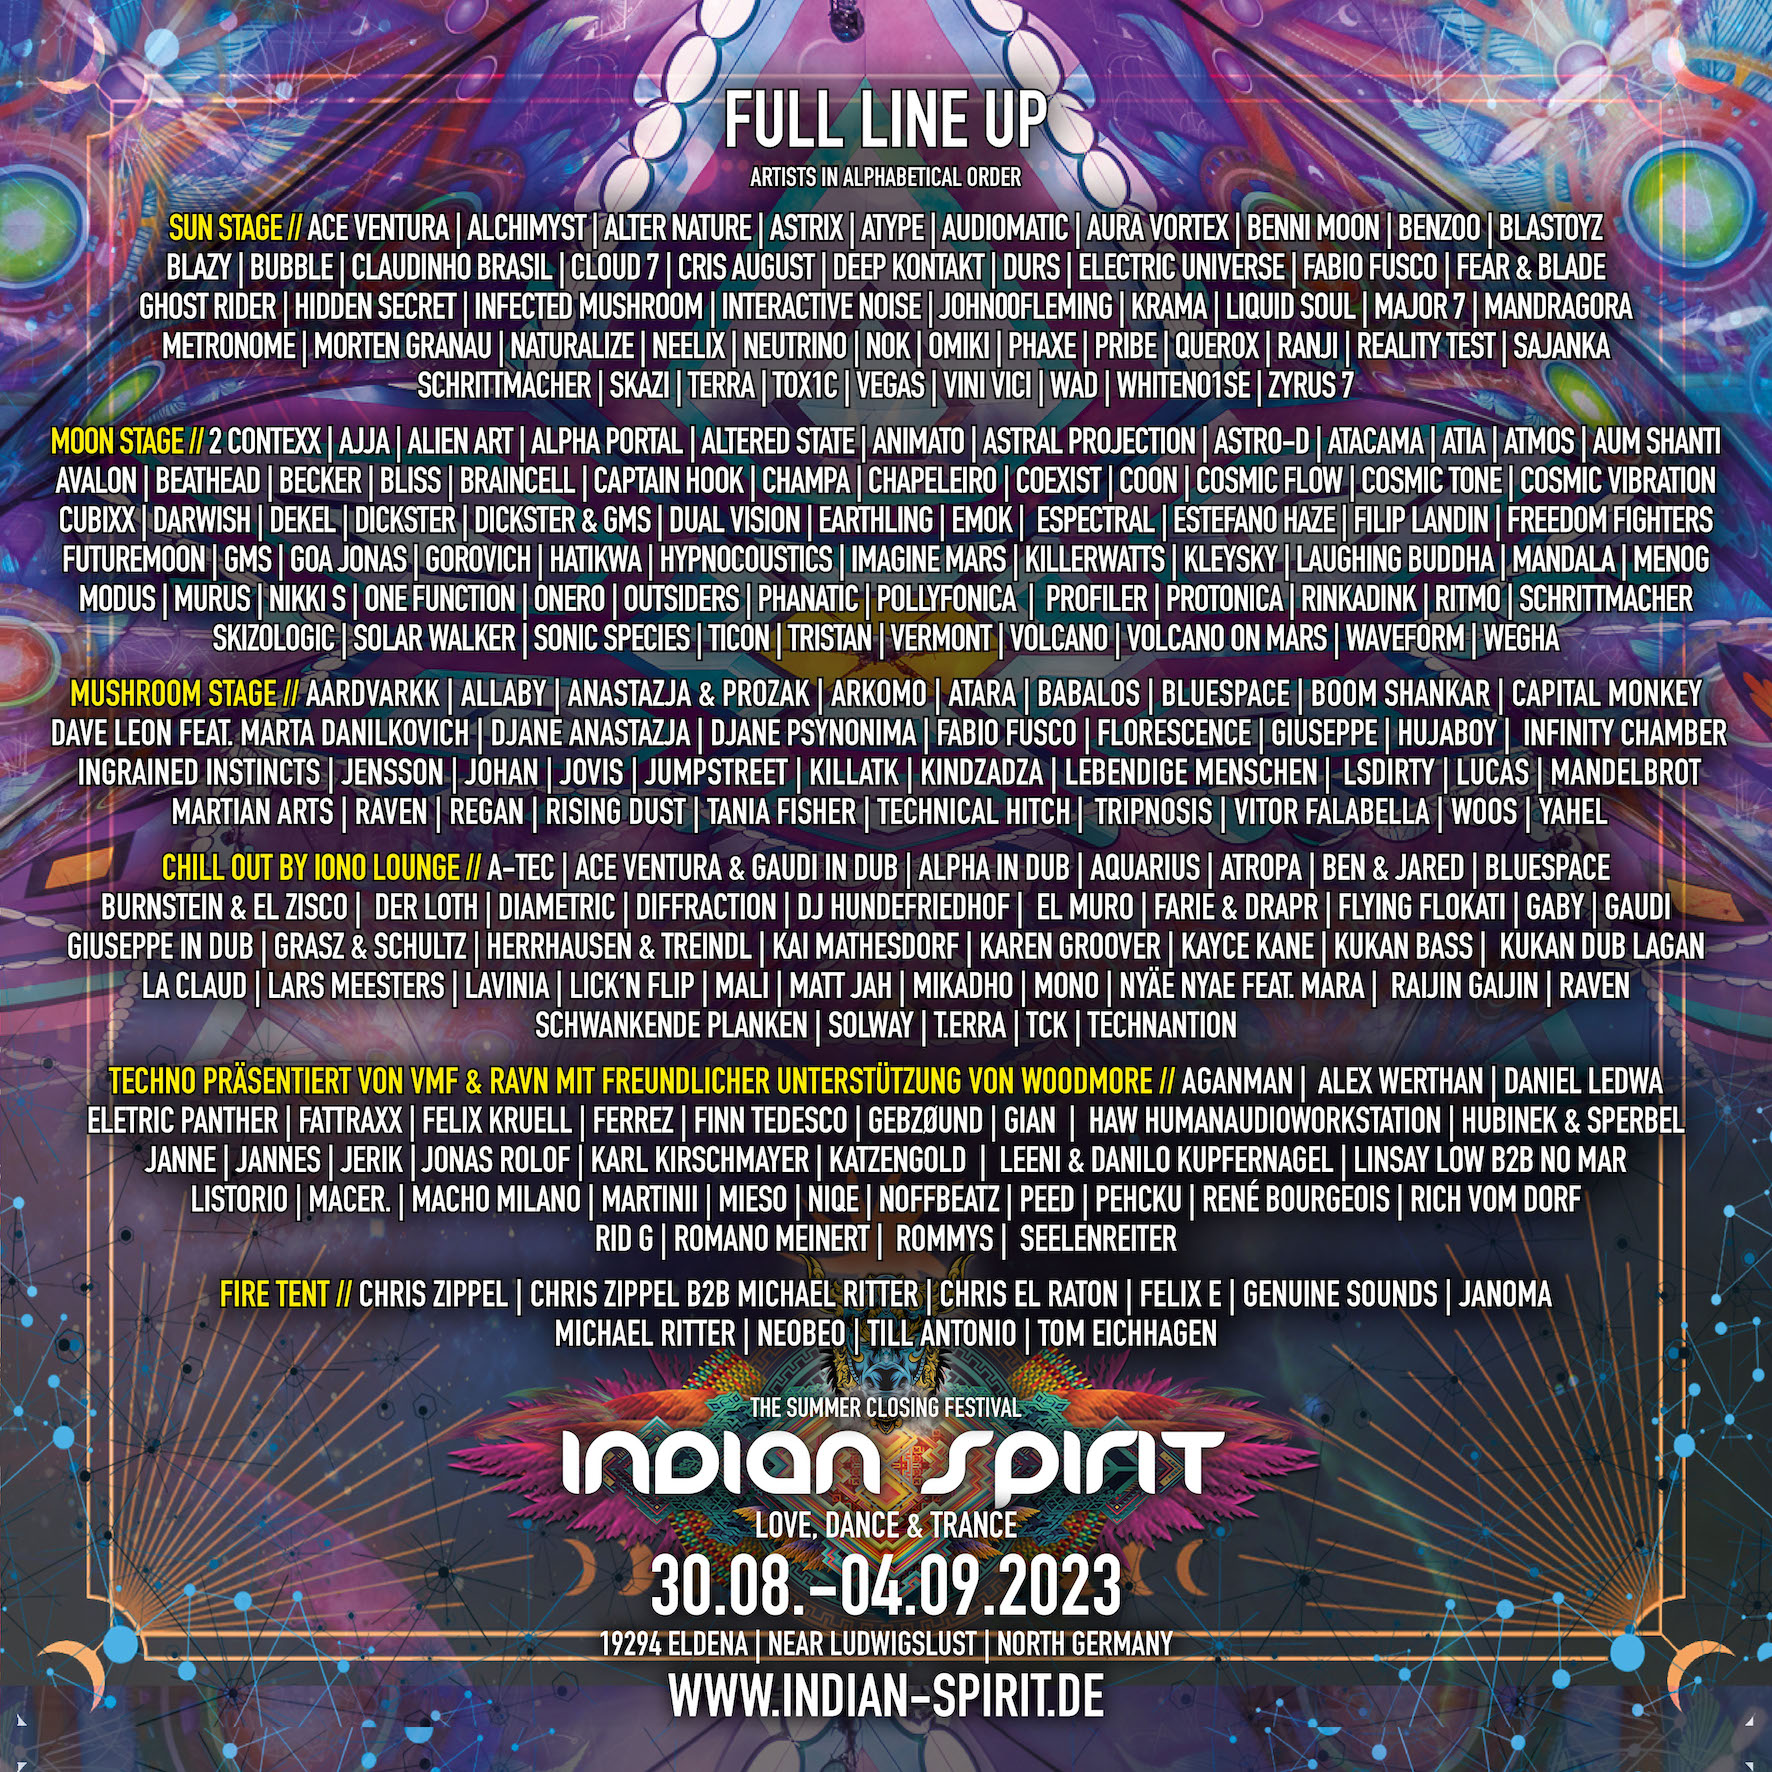 Countdown to the Indian Spirit Festival 2023